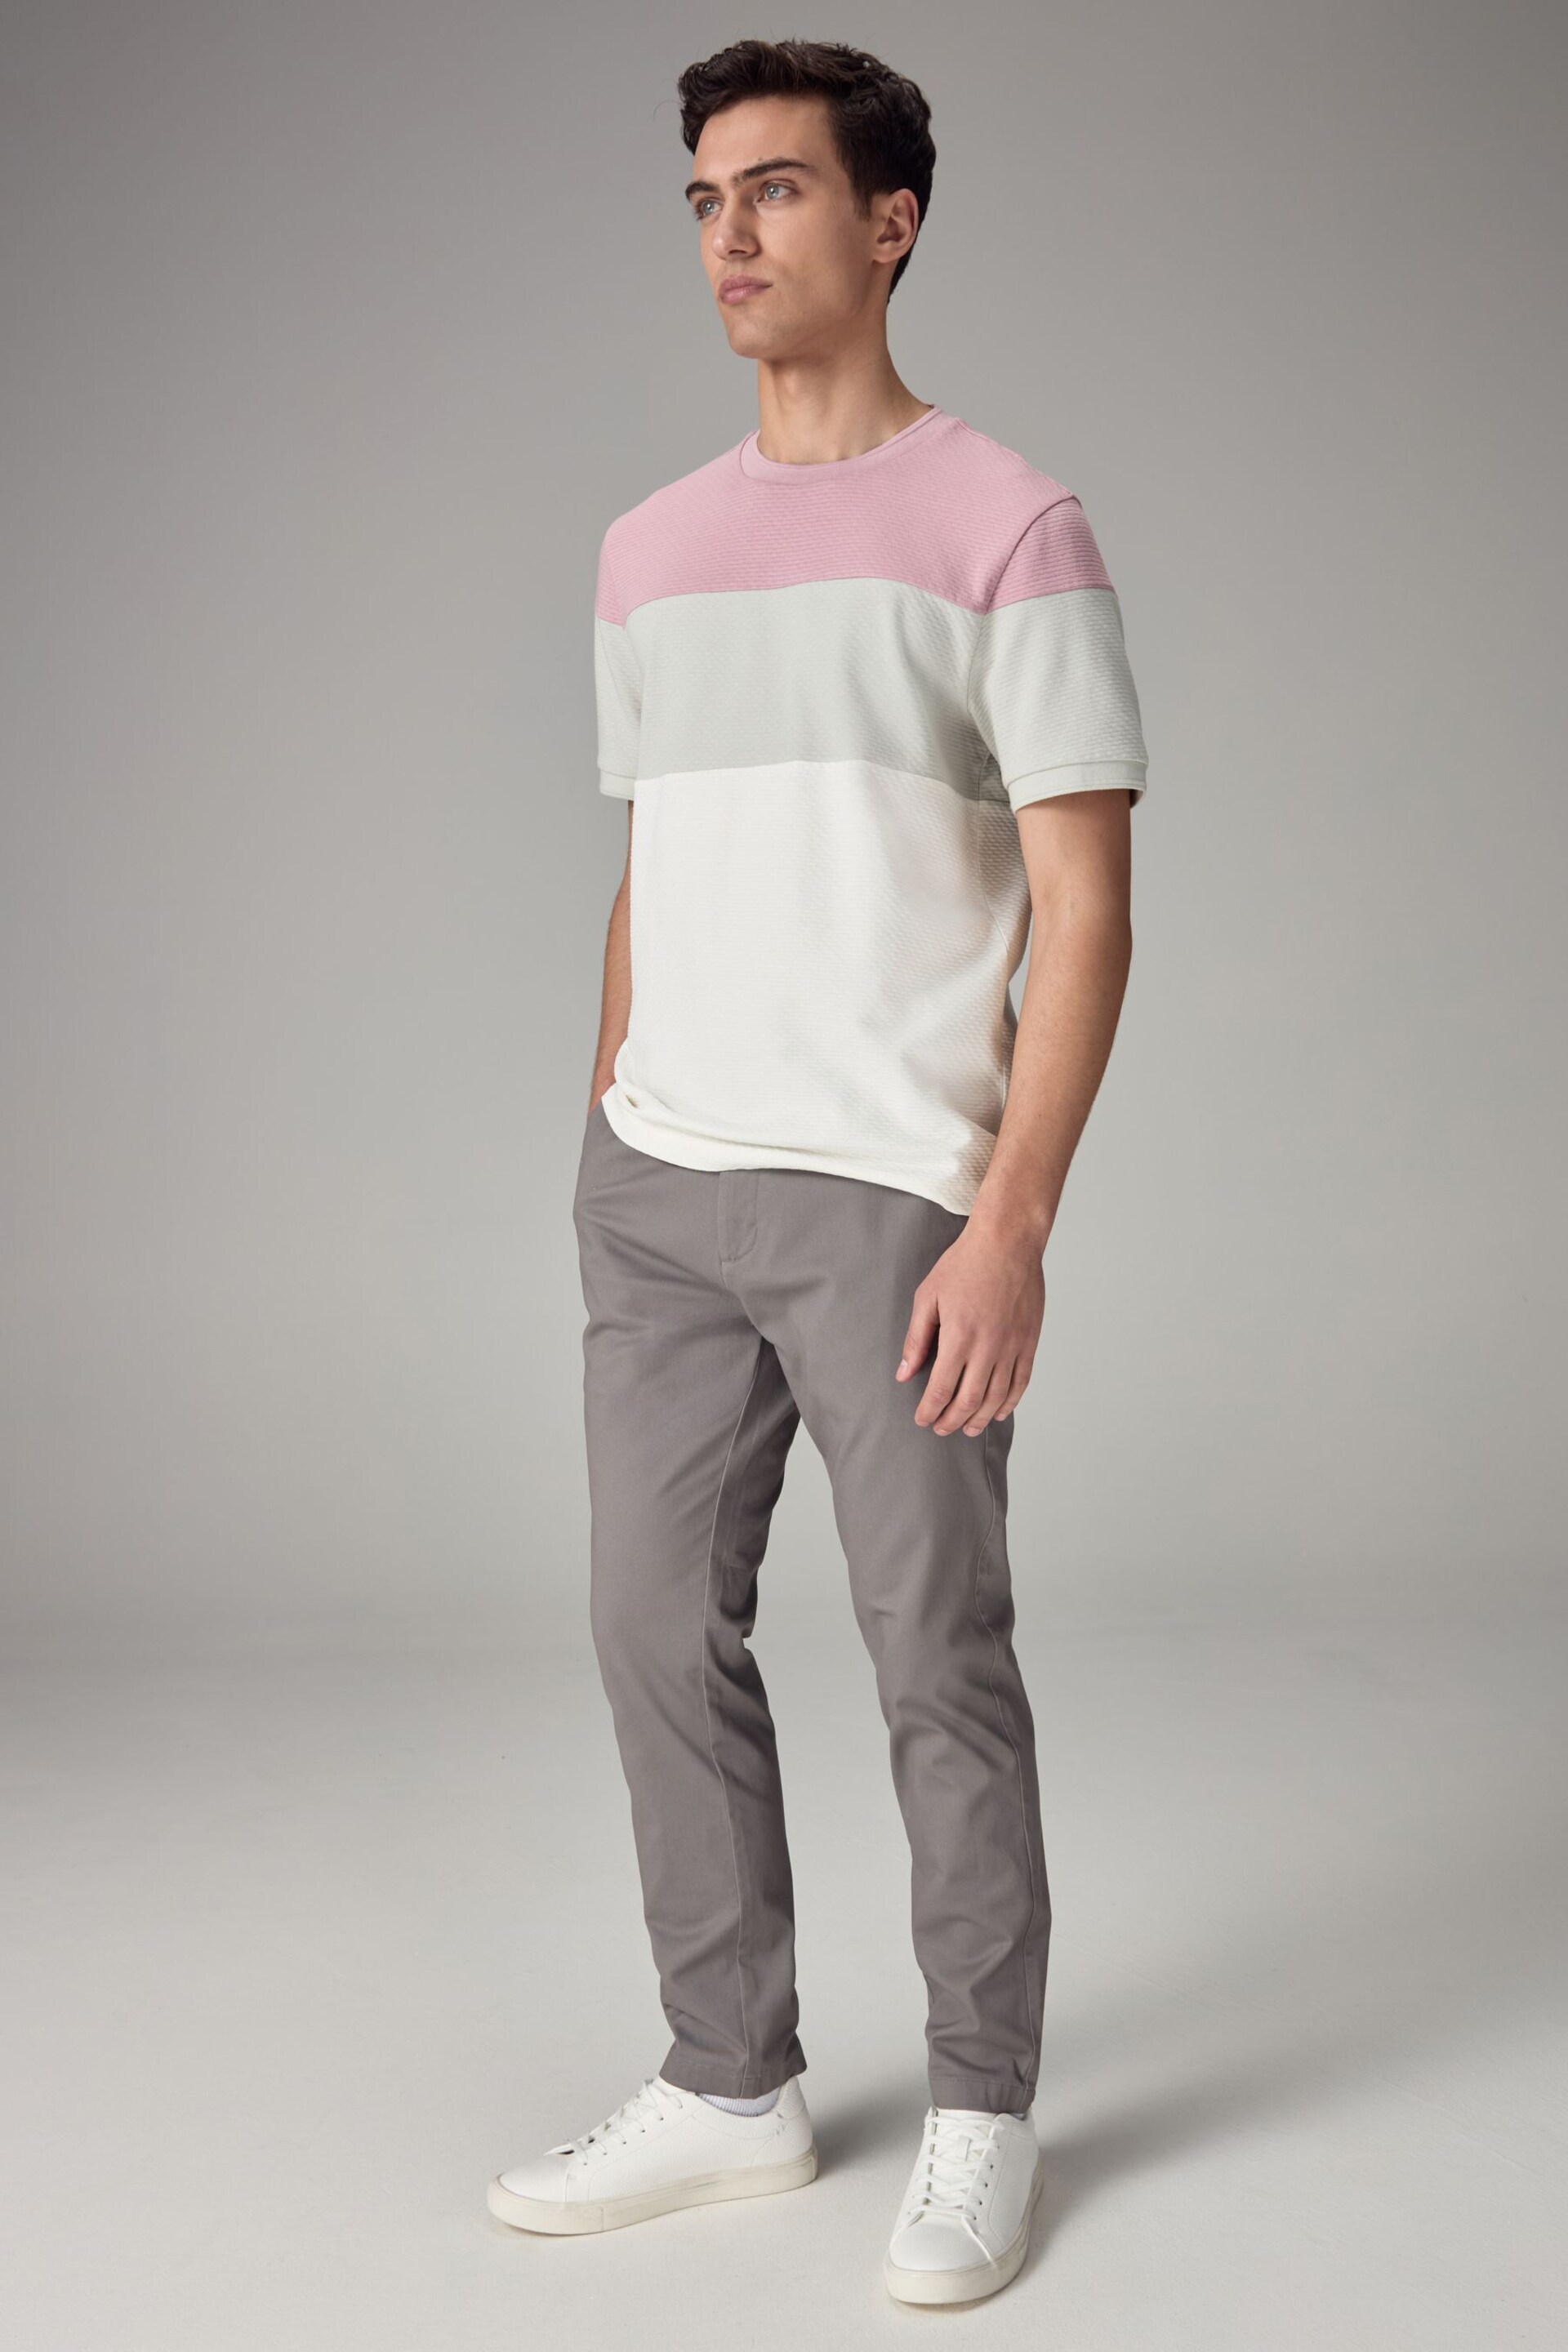 Pink/Grey/White Textured Colour Block T-Shirt - Image 2 of 7